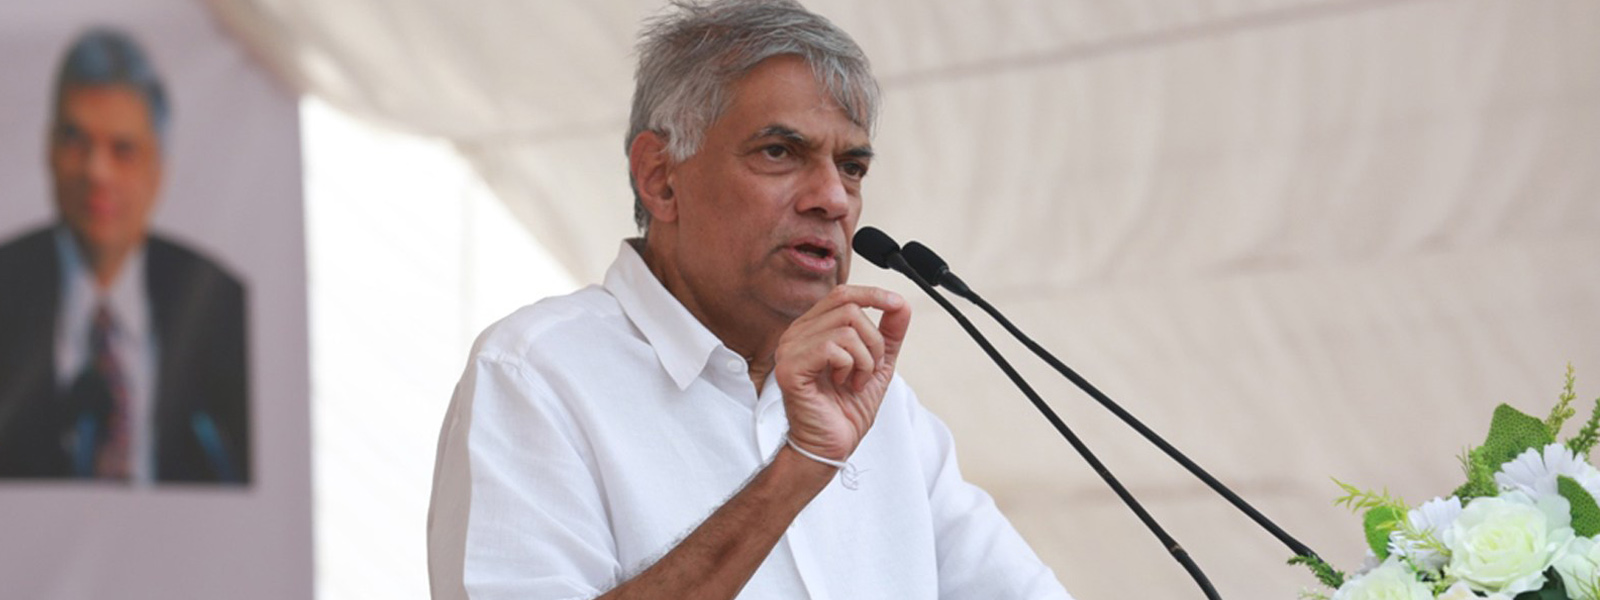 Additional security requested for Ranil W.